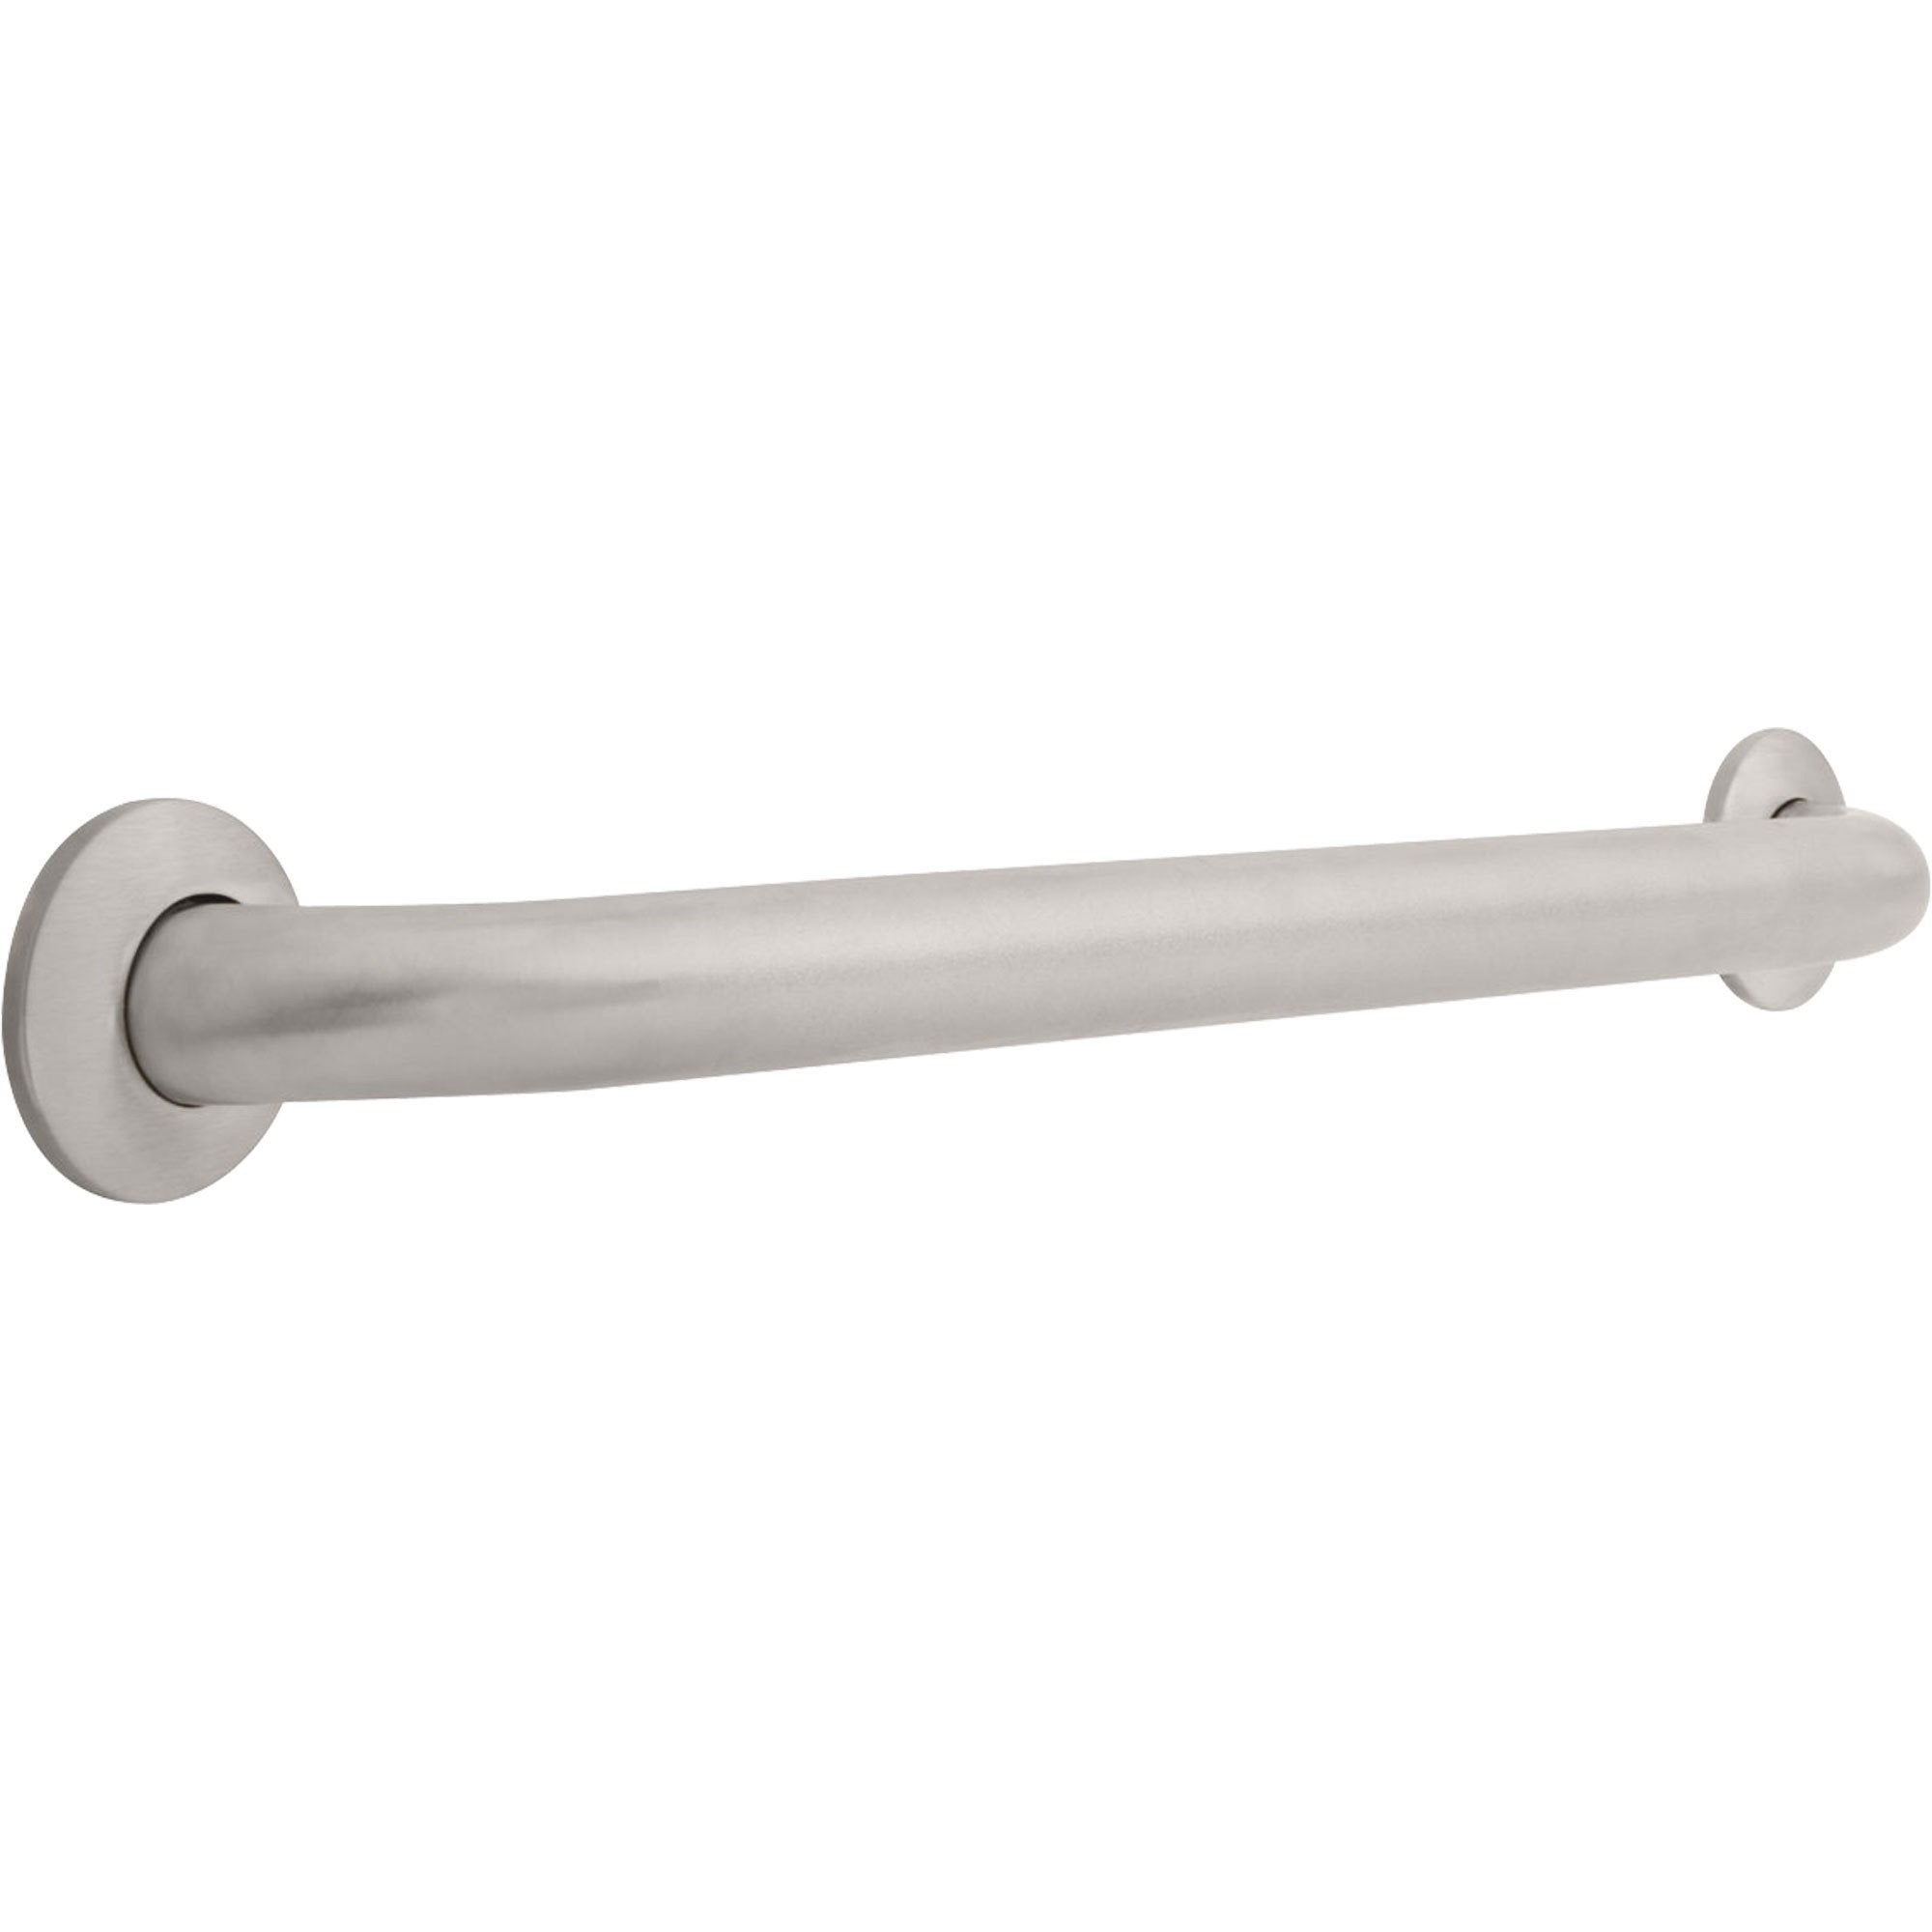 Delta ADA Complaint 1.5" x 24" Concealed Mounting Grab Bar in Stainless 572944